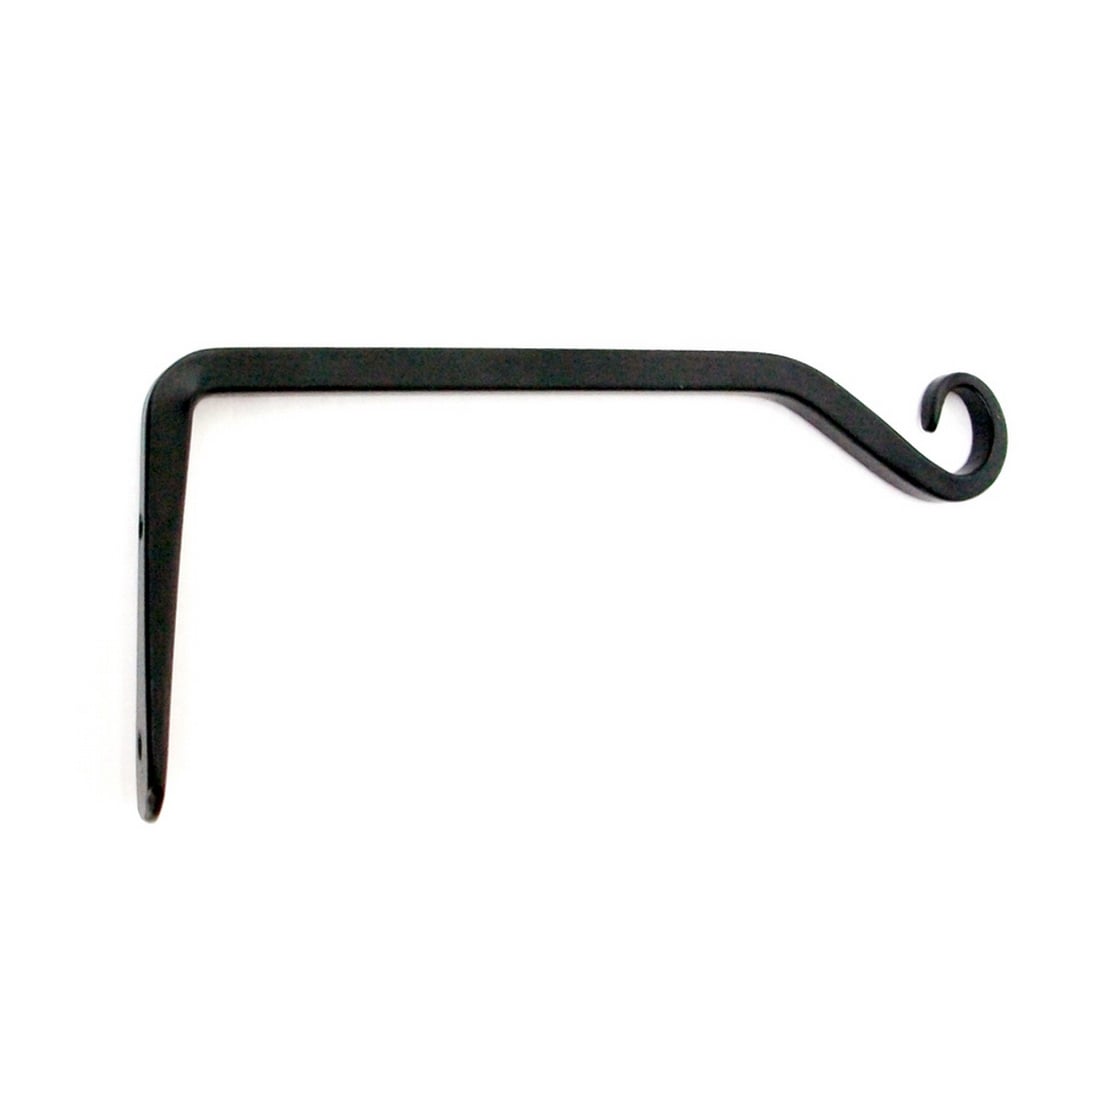 50 Pack S Hooks For Hanging Plants, 1.73 Inch Small Black S Hooks, Heavy Duty Mini S Hooks, Ornament Hooks For Hanging Jewelry, Plants Decorations